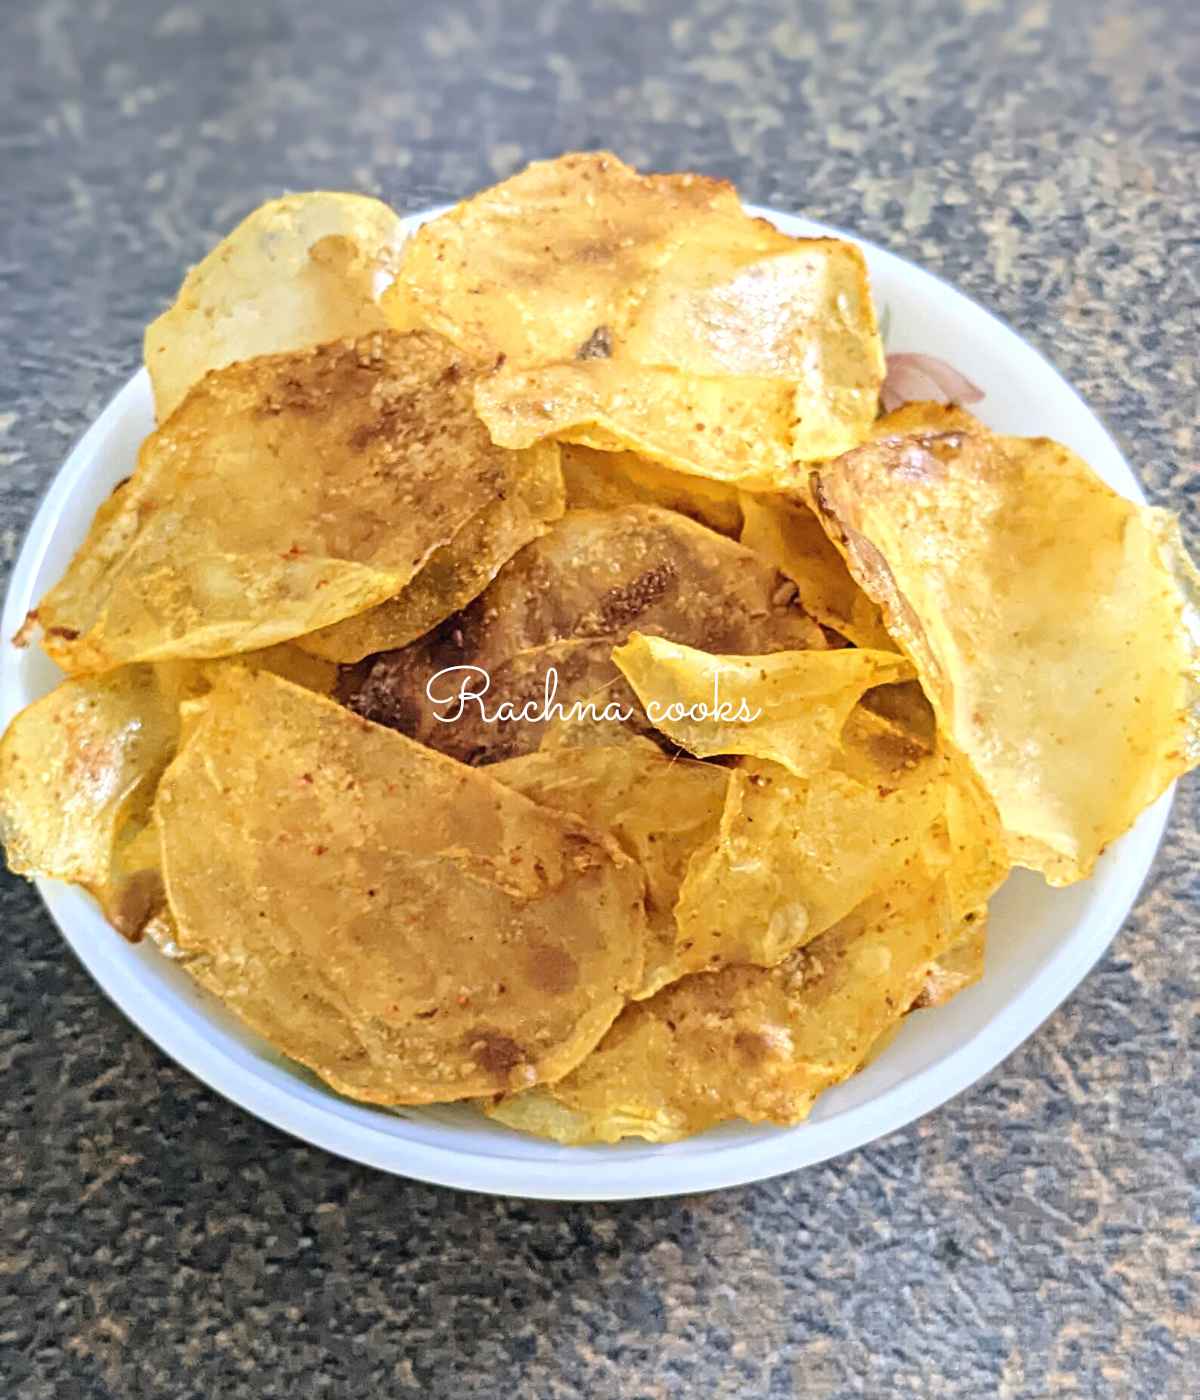 A bowl of crunchy potato chips against a grey background.